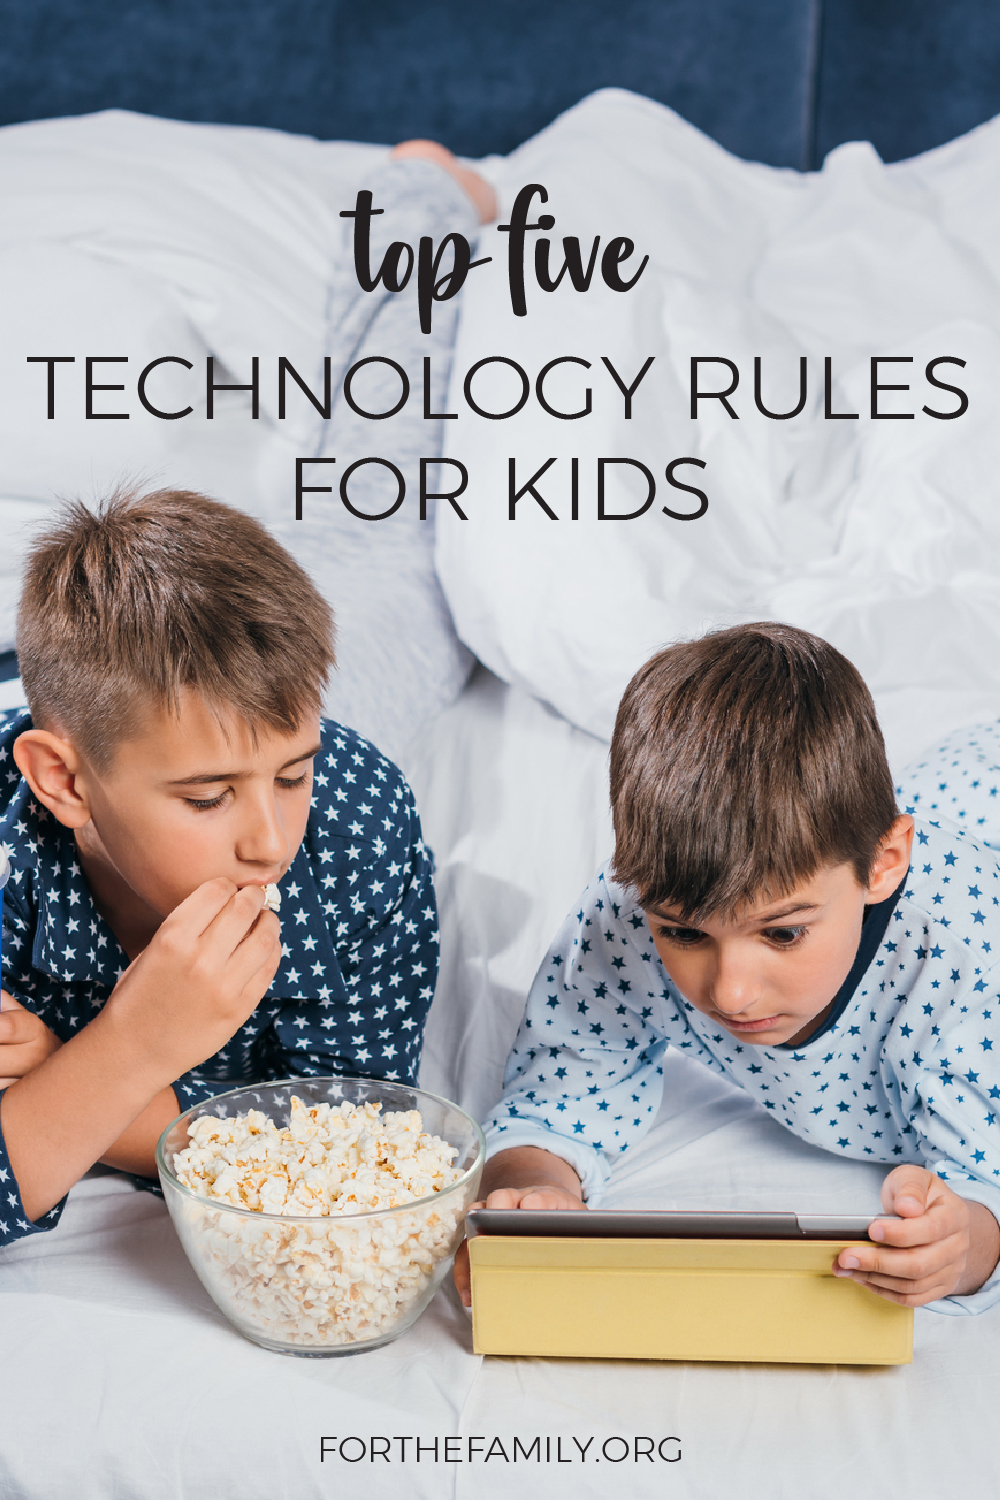 Top Five Technology Rules for Kids